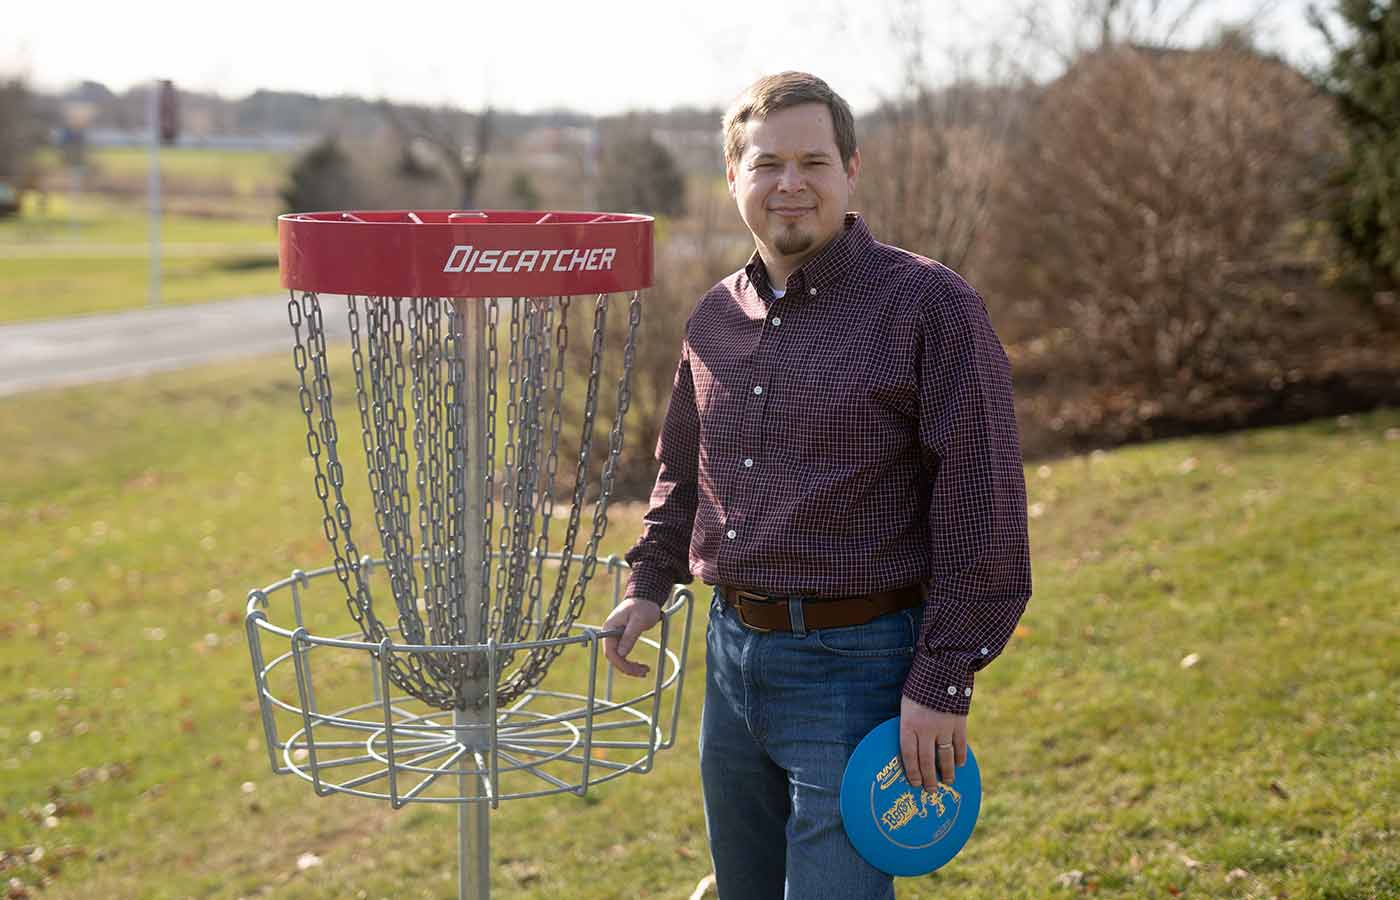 Joe Leese standing by a disc golf course